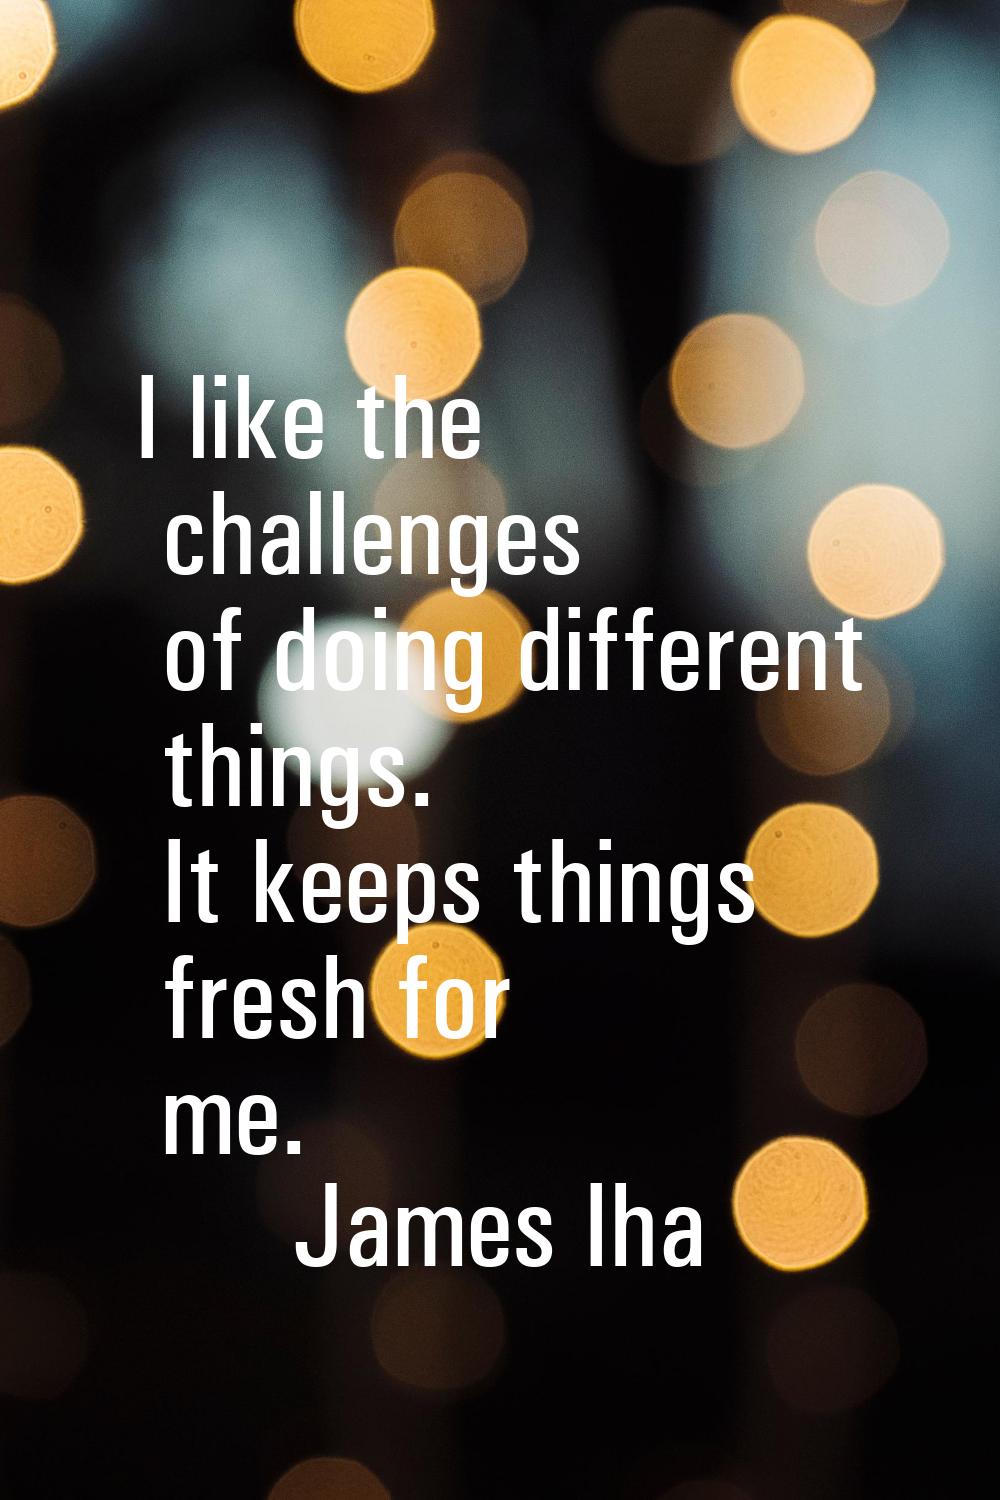 I like the challenges of doing different things. It keeps things fresh for me.